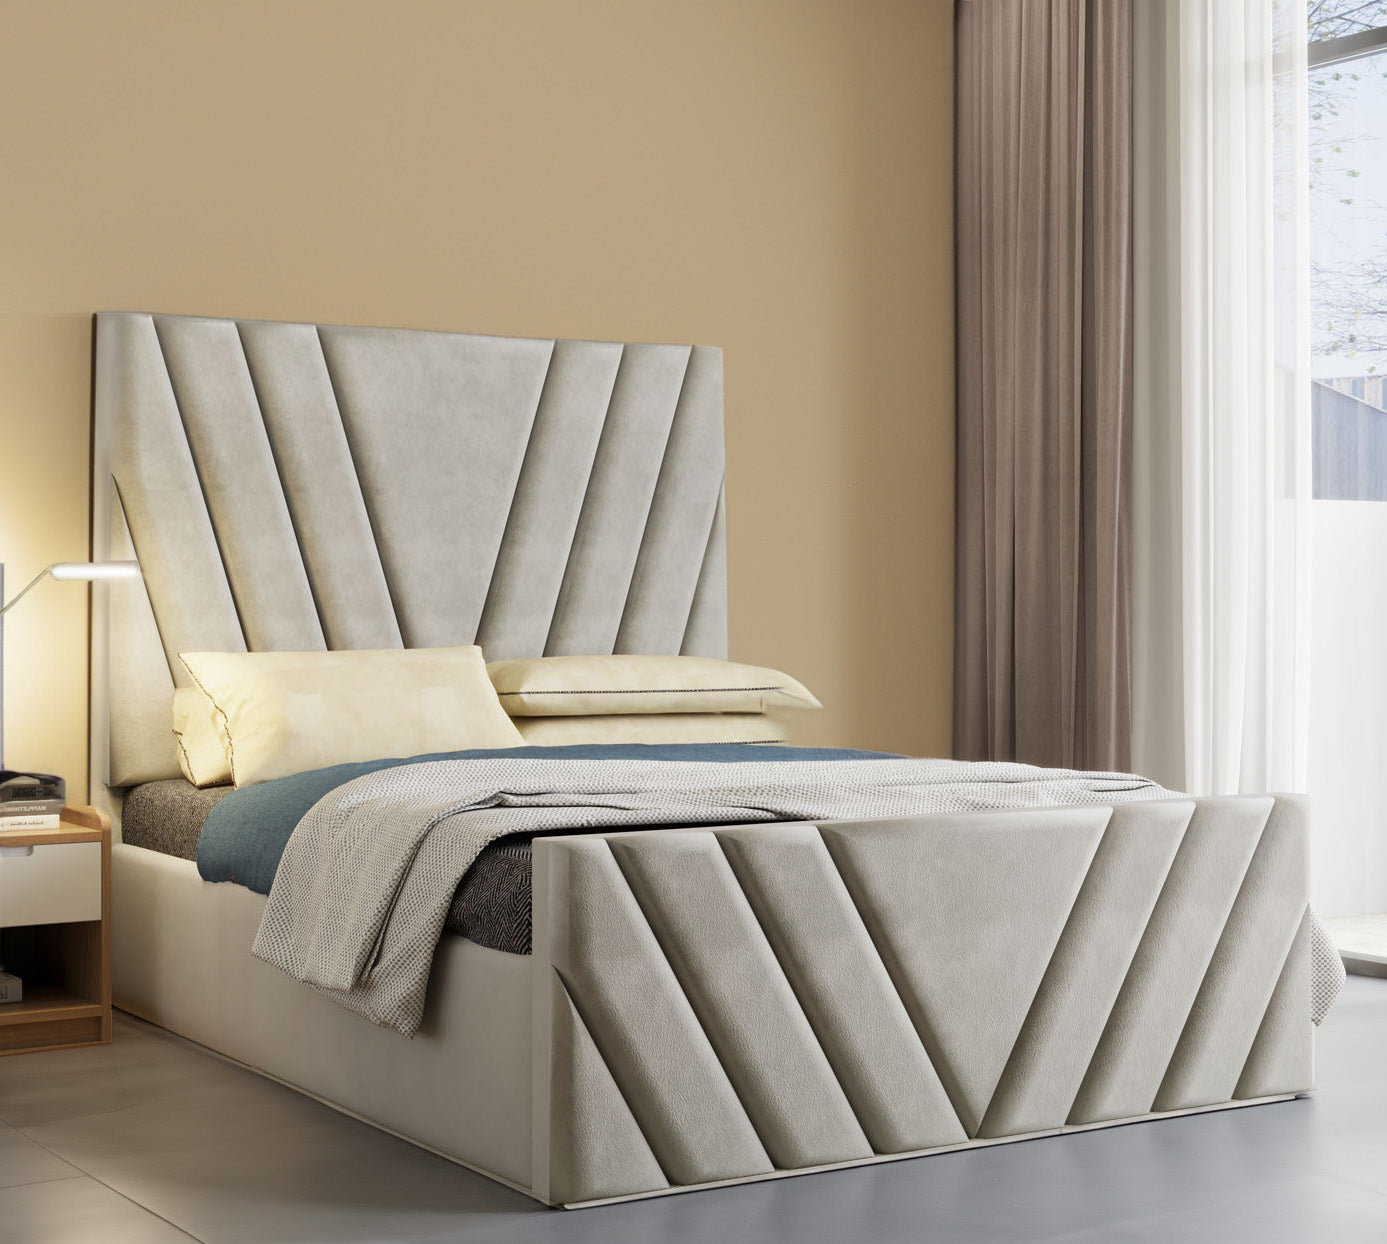 Vermont upholstered bed